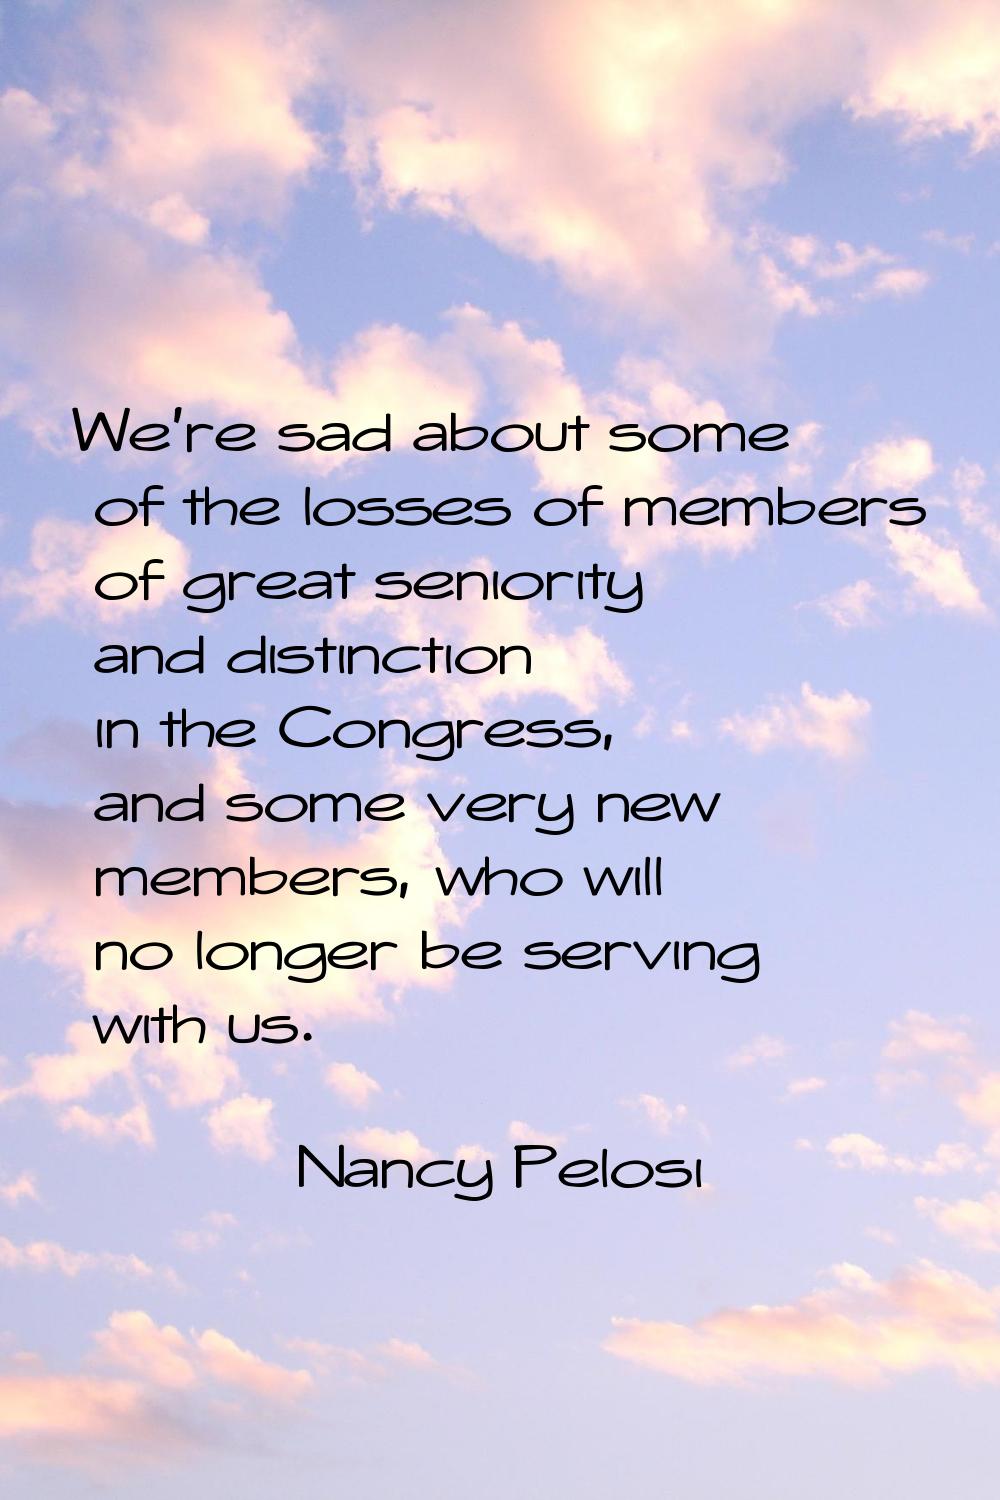 We're sad about some of the losses of members of great seniority and distinction in the Congress, a